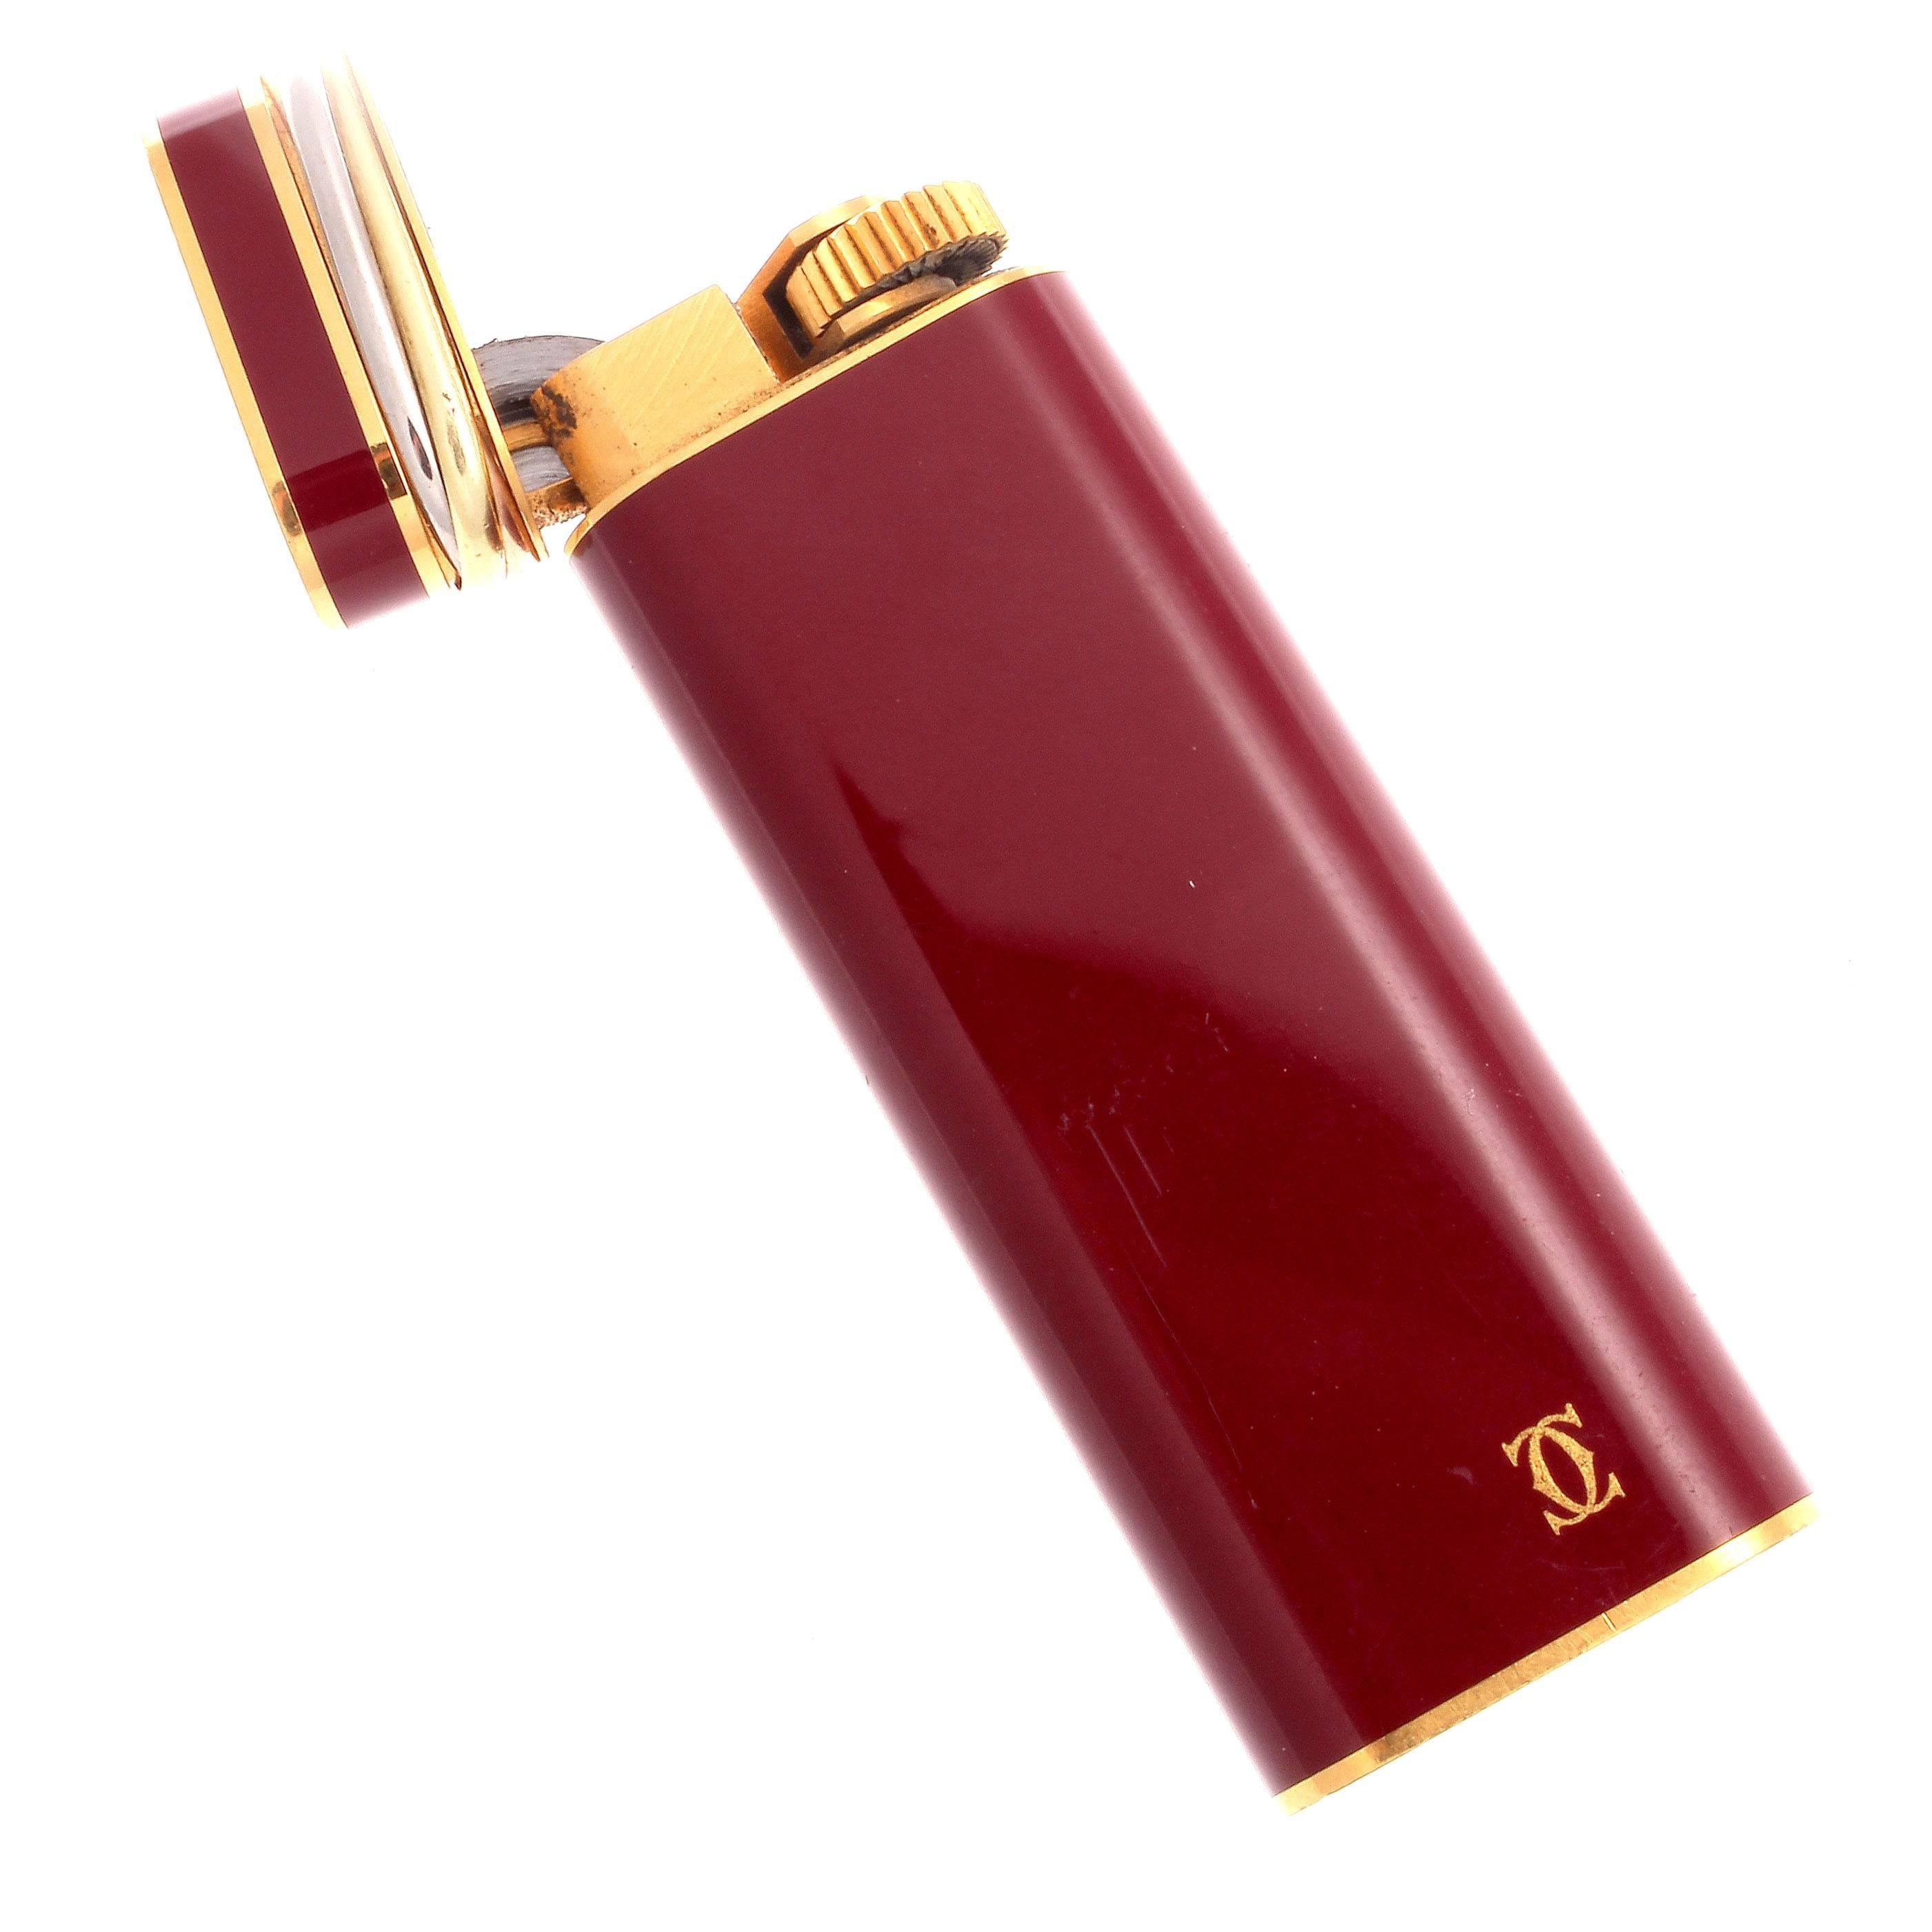 A chic, elegant accessory by the always stylish French jewelry house, Cartier. Featuring one of their most famous designs, the trinity, which is perfectly complimented by the burgundy red. Signed Cartier and numbered.